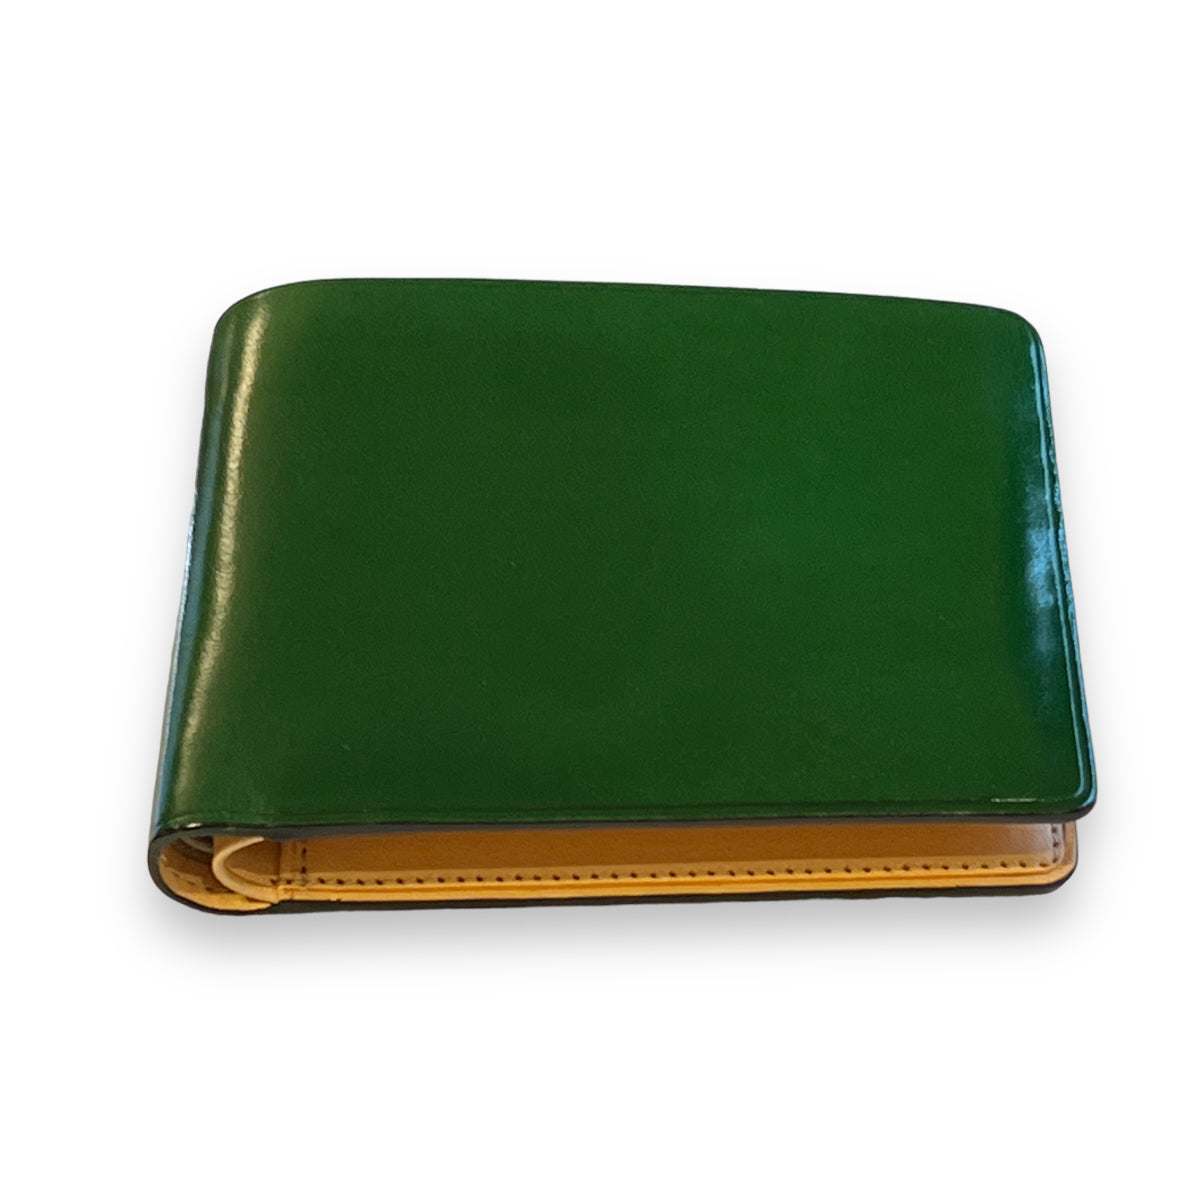 Il Bussetto Bi-fold Wallet forest green